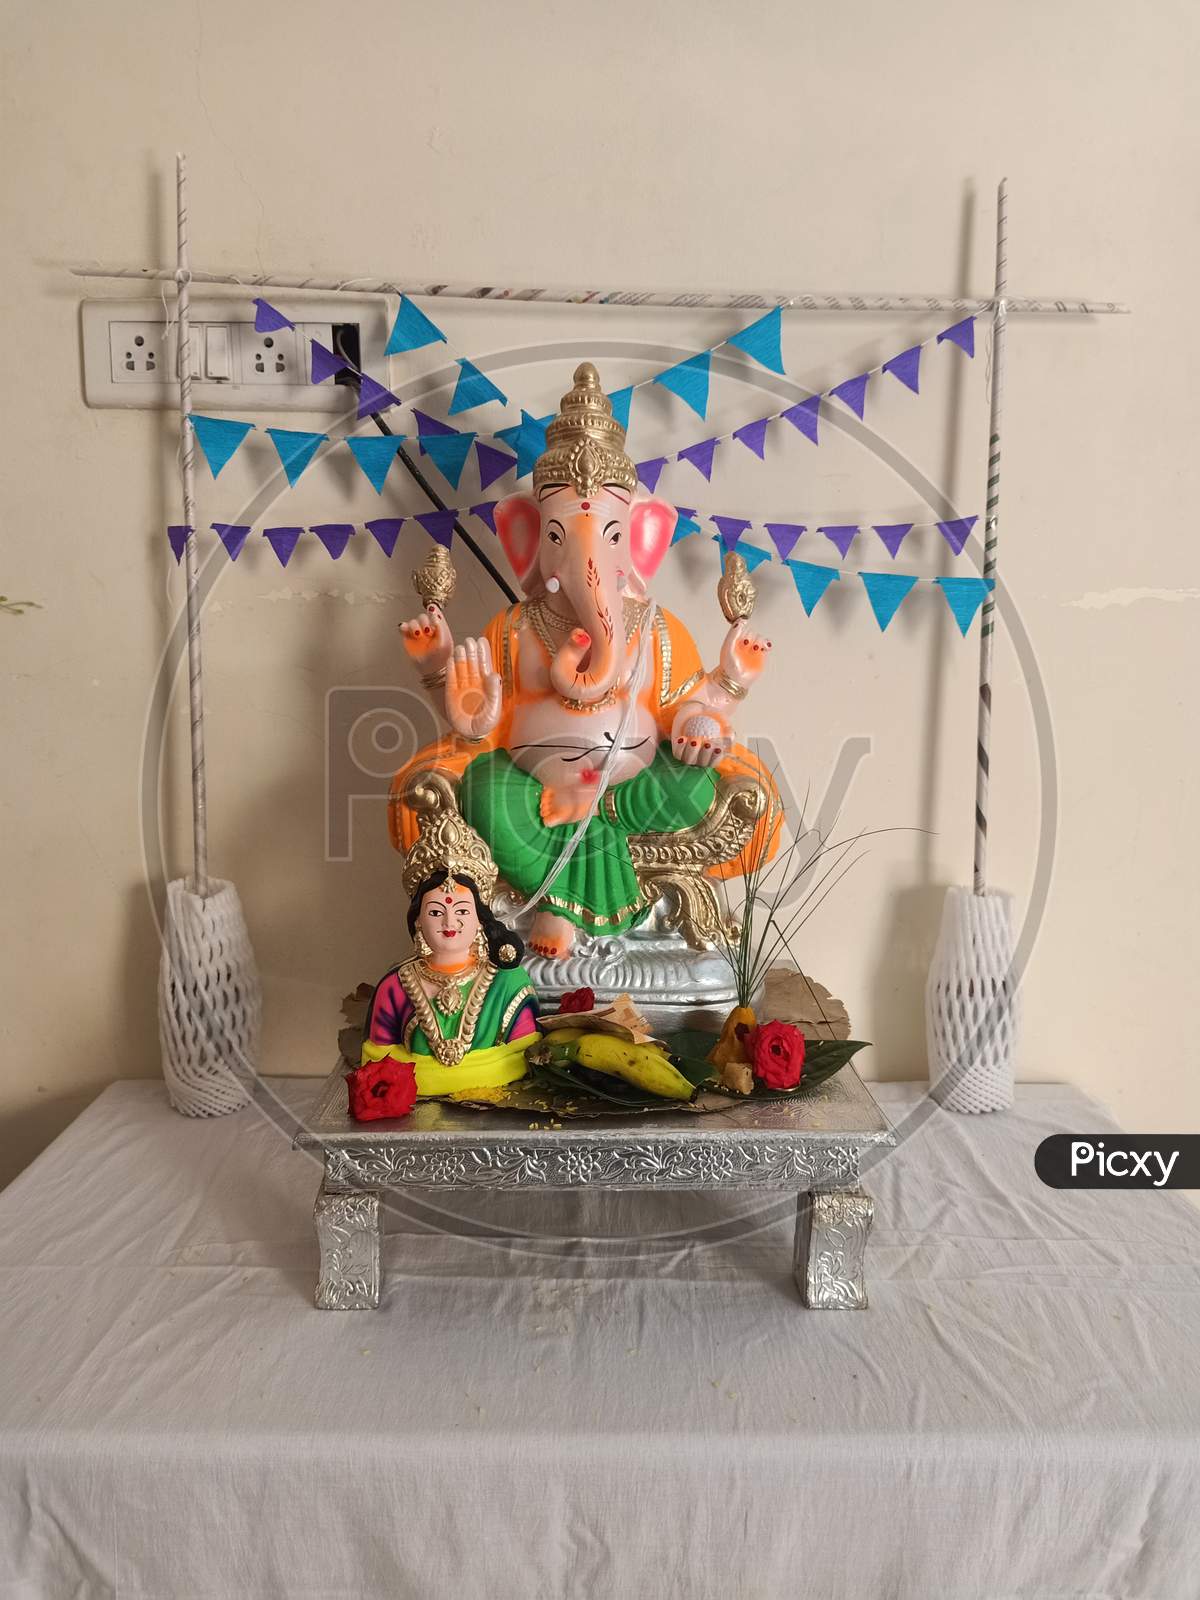 celebrating the Ganesh Chaturthi festival in a home decorated with garland flowers, lamps, fruits... Vinayaka Chaturthi,  Ganapati pooja, and Gowri Habba